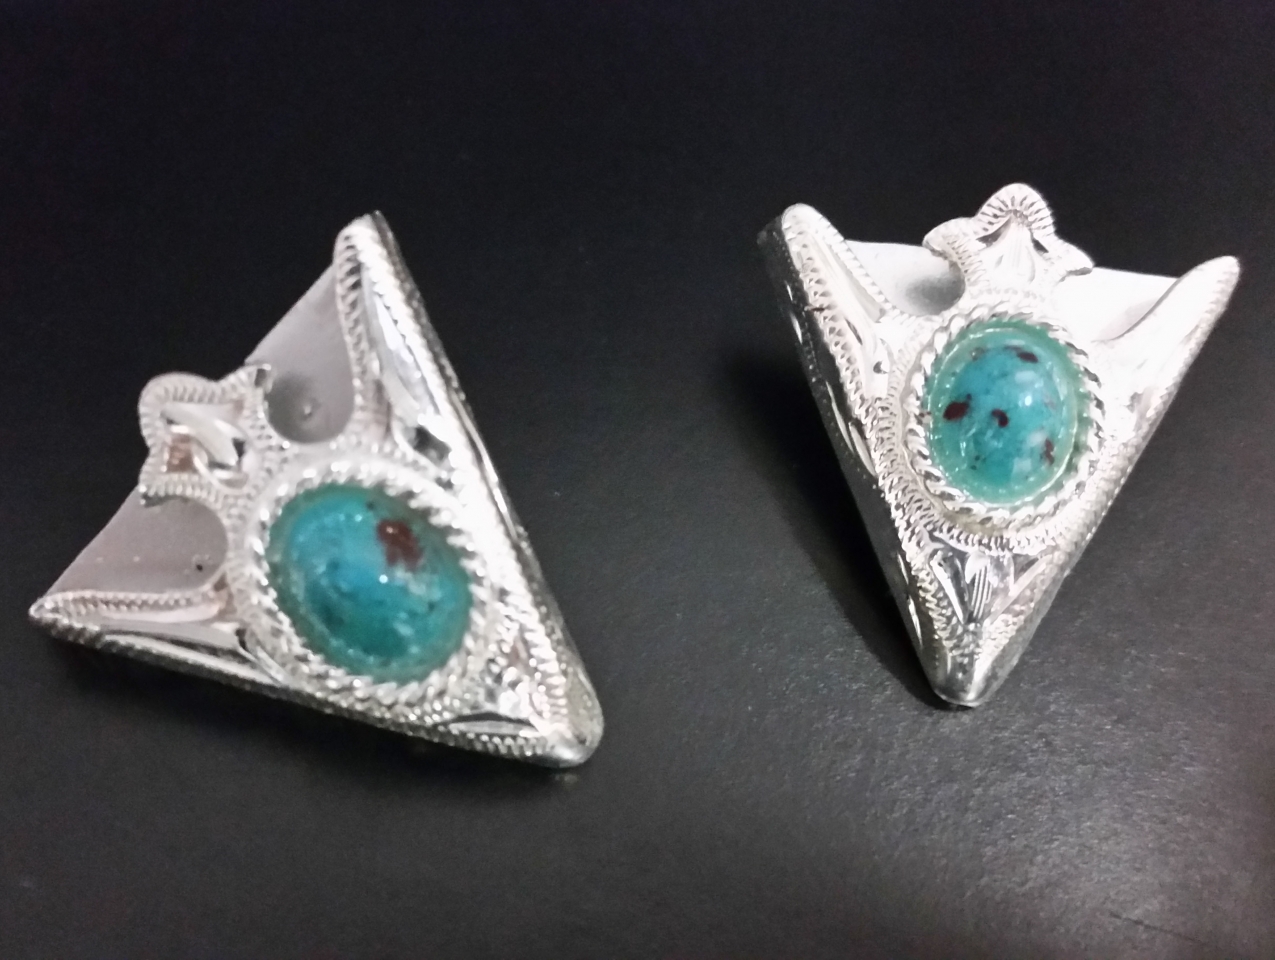 New Austin Accent Collar Tips Engraved Silver Turquoise Stone Small 1” X 1” 